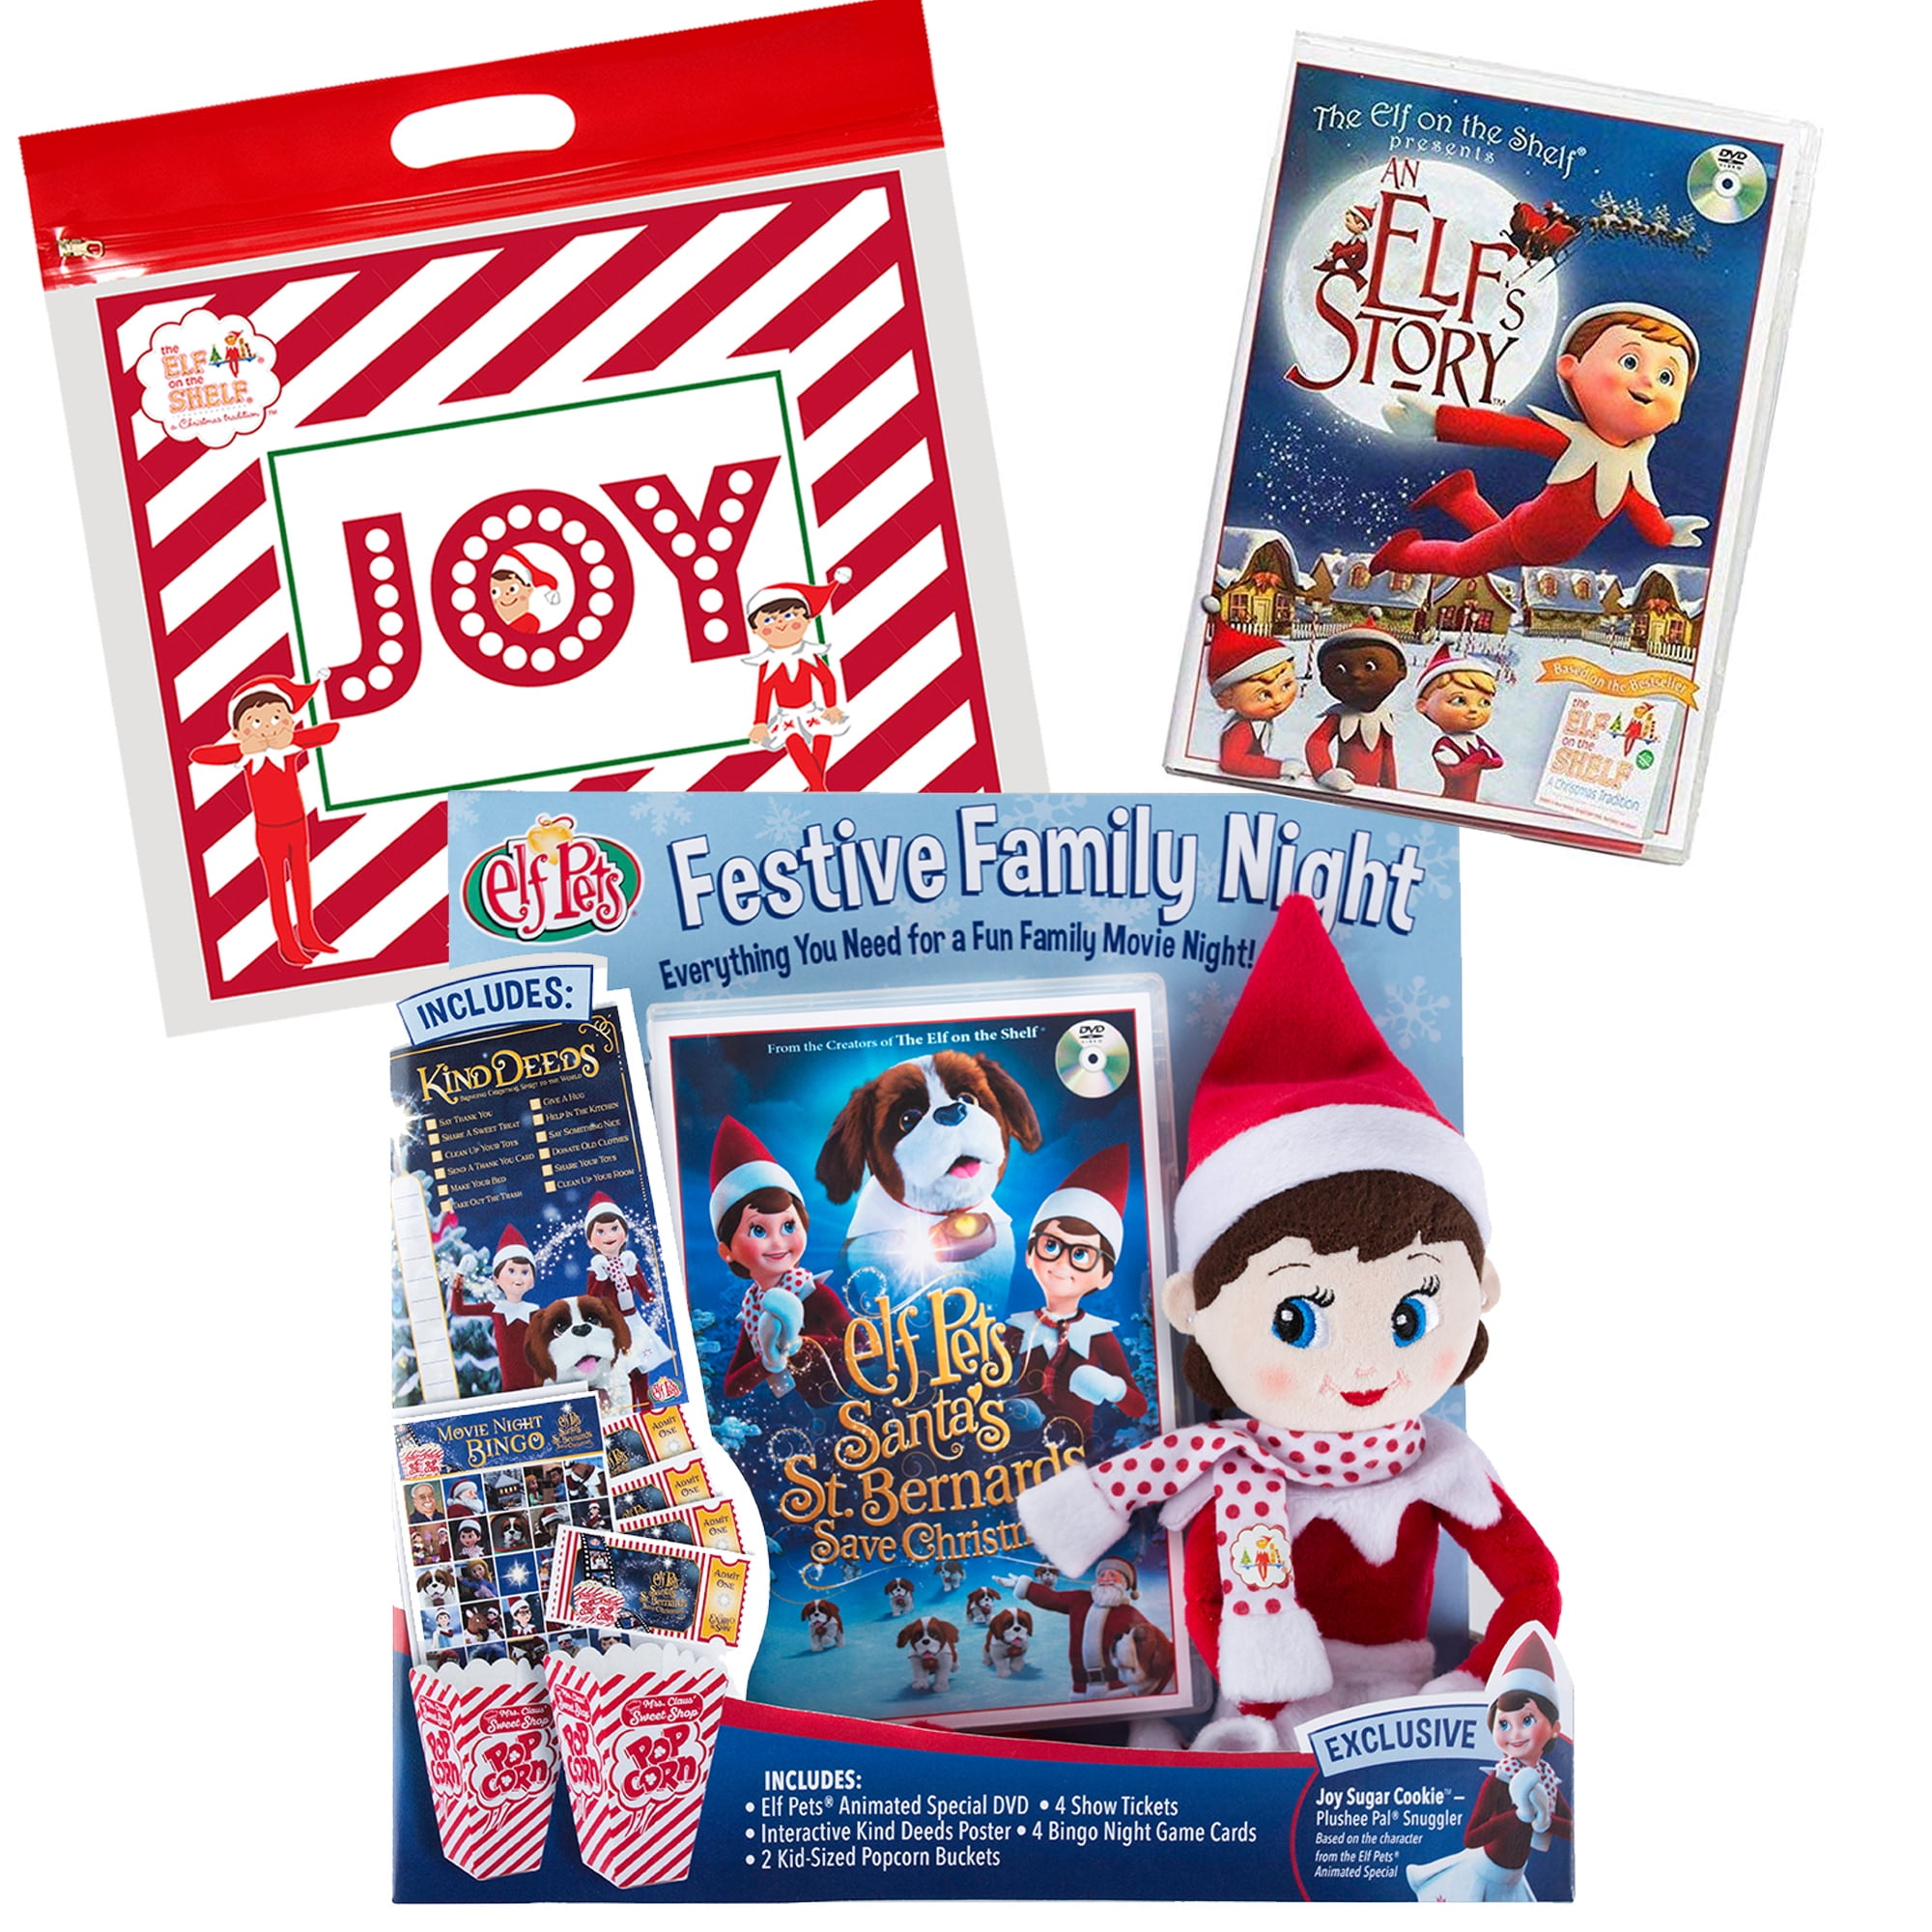 The Elf on the Shelf Festive Family Night with 2 DVDs and Exclusive Joy ...